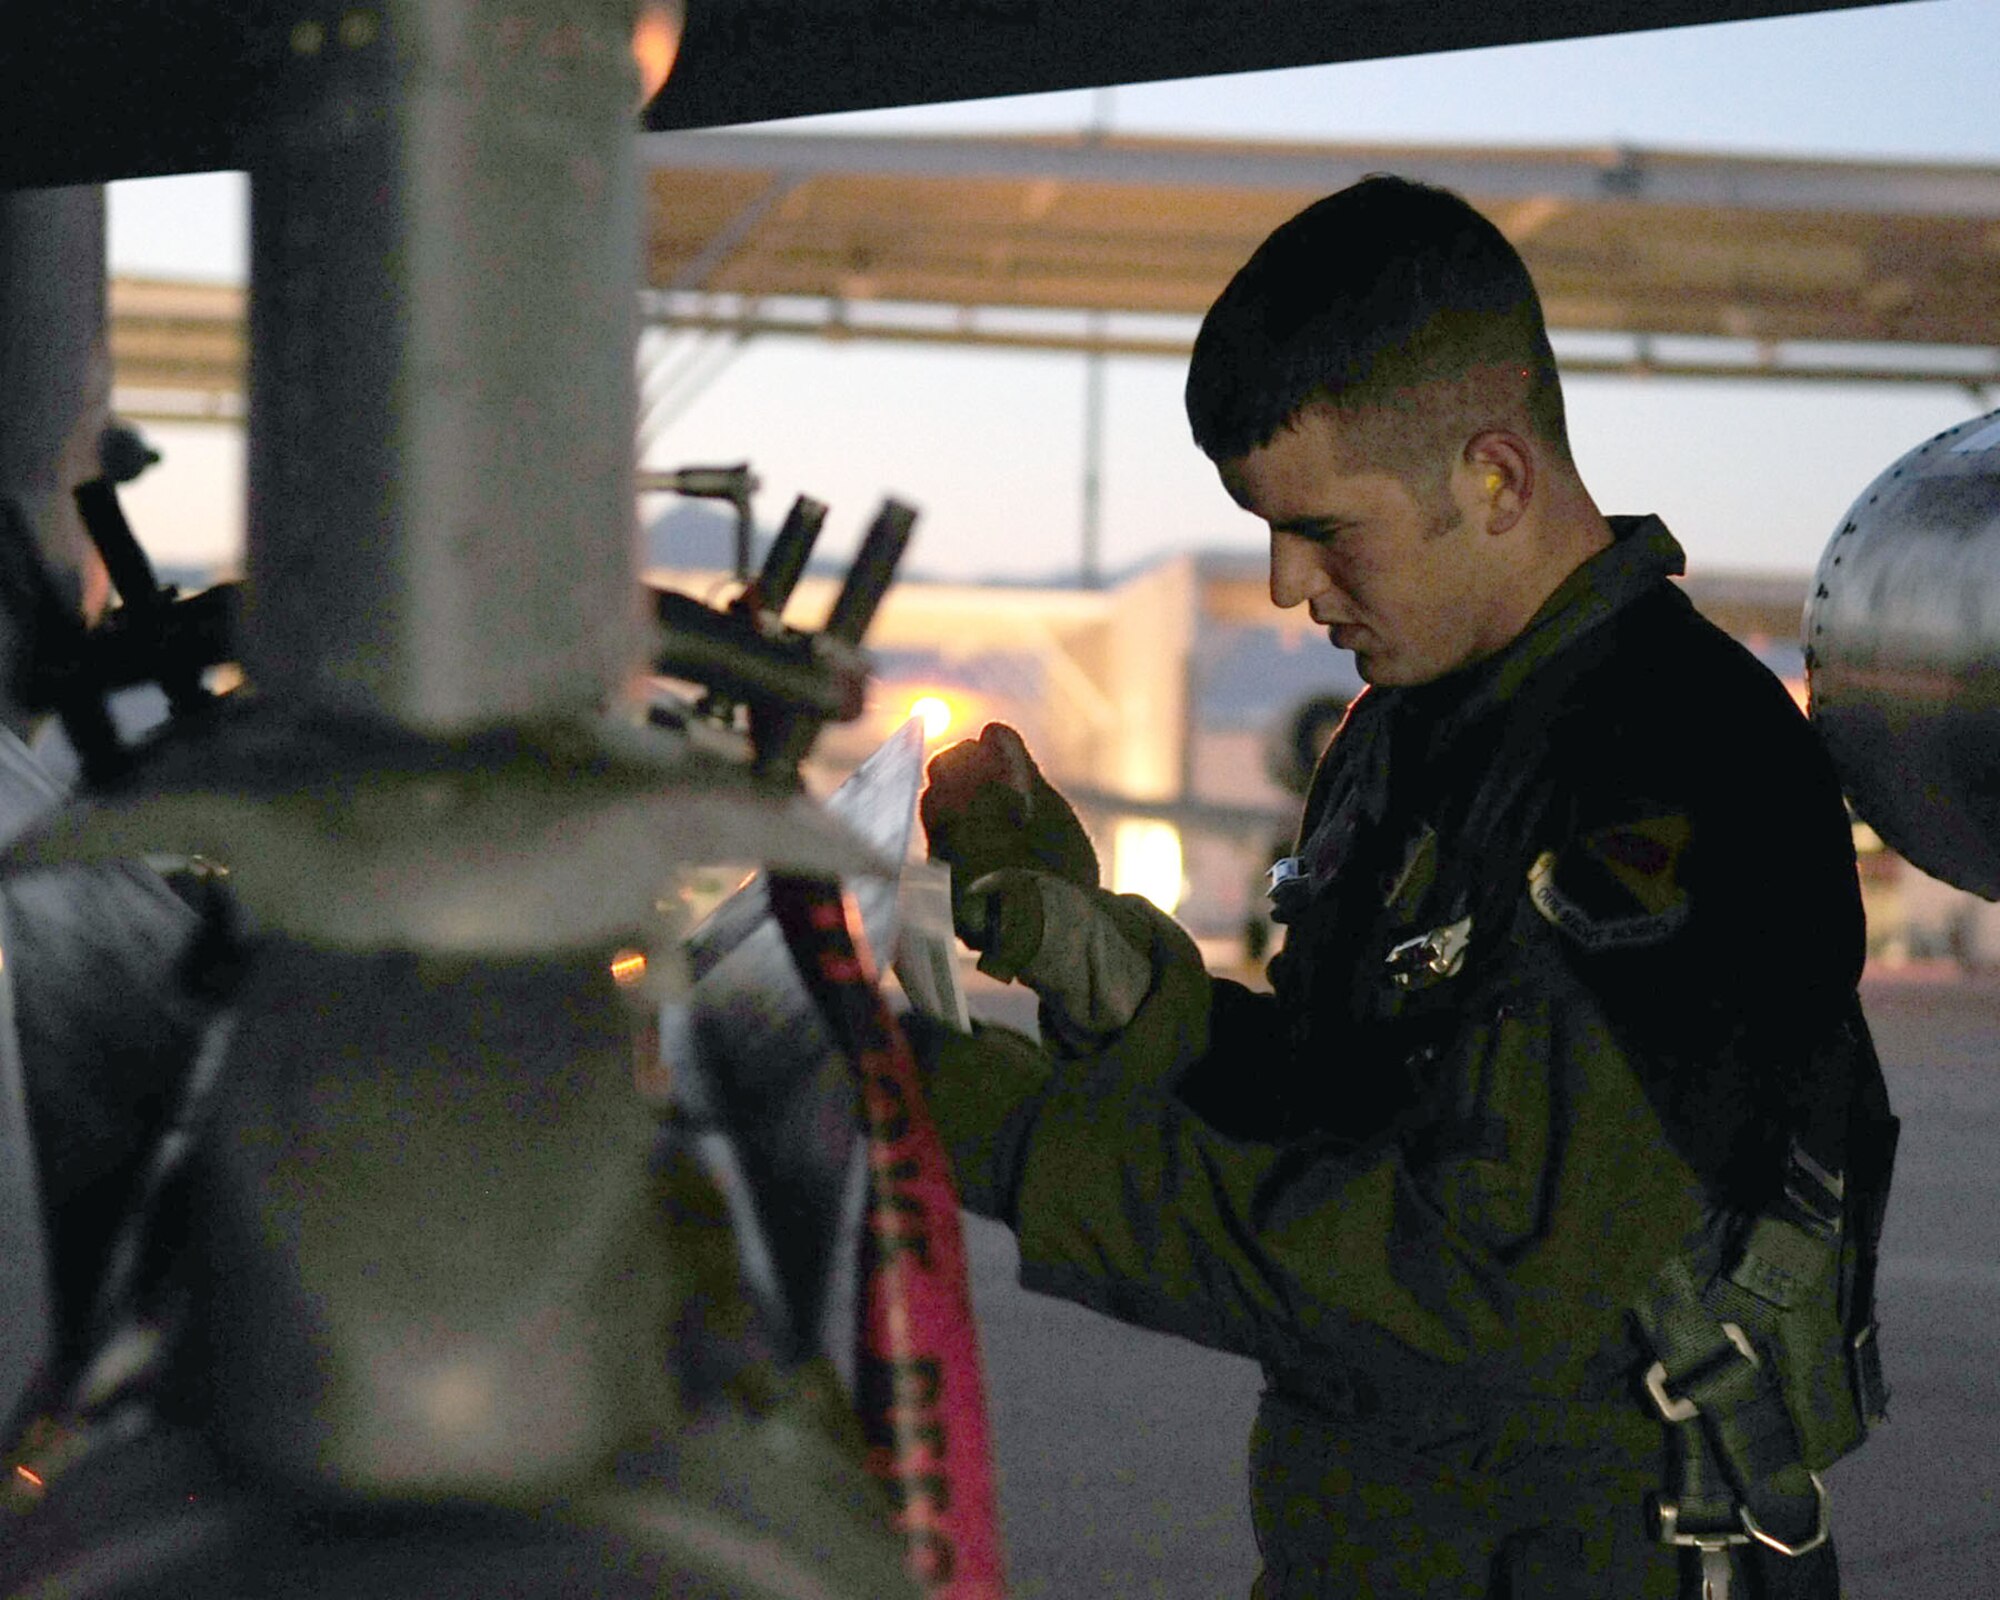 Prior to a training flight June 23, 2010, 1st Lt. Dan Griffin, a pilot from the 358th Fighter Squadron at Davis-Monthan Air Force Base, Ariz., inspects his A-10C Thunderbolt II aircraft. This was the lieutenant's second of eight night flying missions as part of the A-10C Pilot Initial Qualification course curriculum. Upon completion of this course he will be a fully qualified A-10C pilot.  (U.S. Air Force photo/Airman 1st Class Jerilyn Quintanilla)